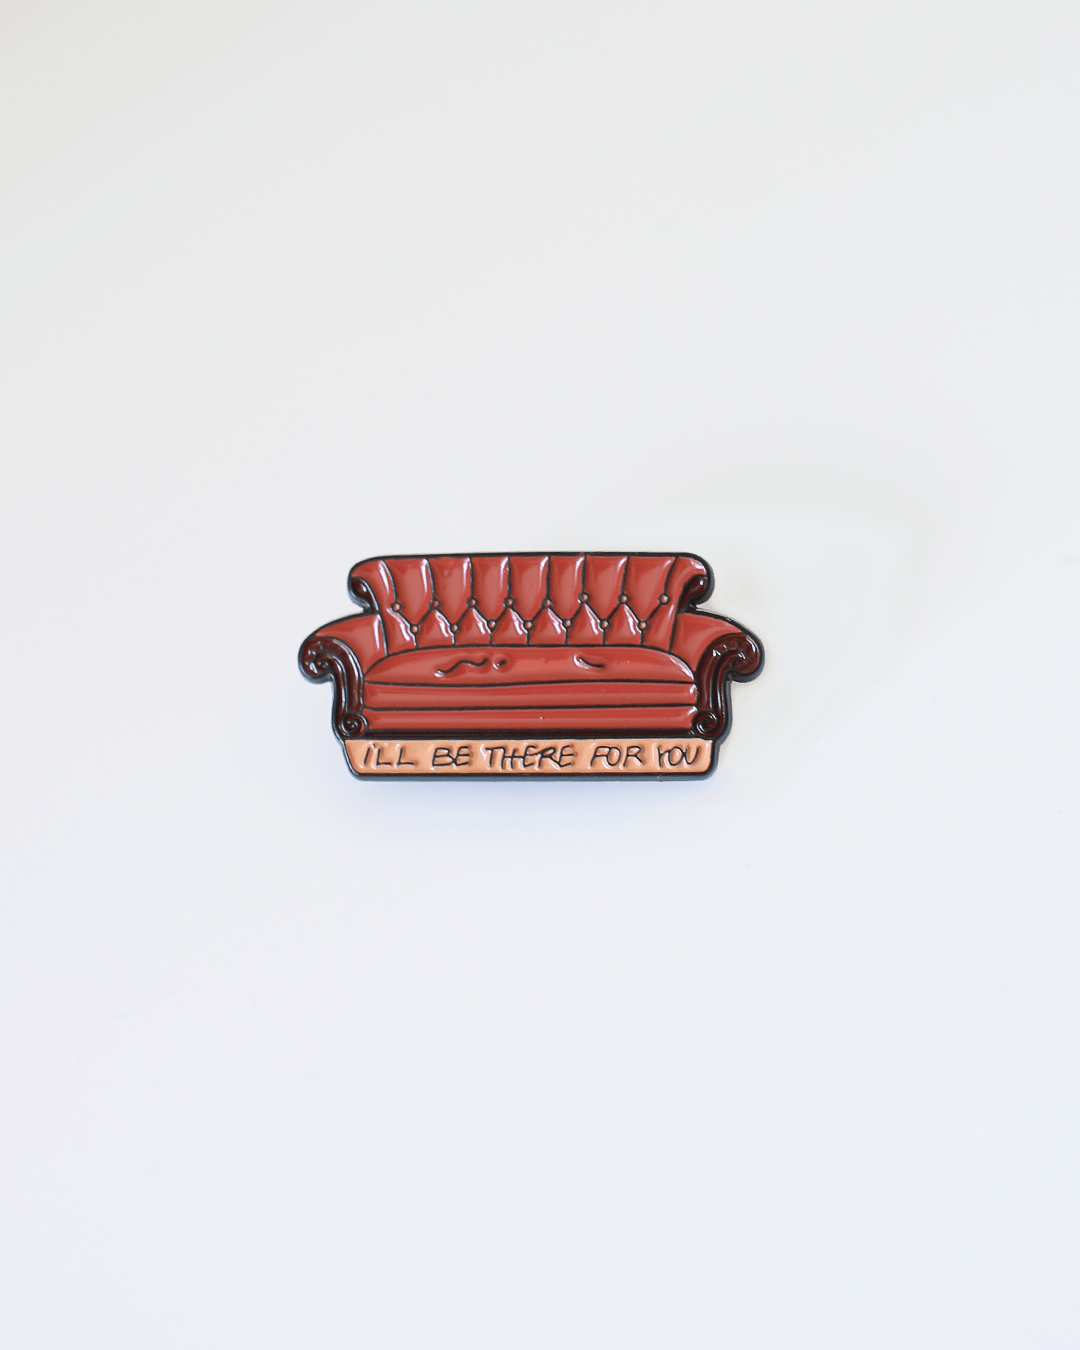 I'll Be There For You Friends Inspired Pin Badge - Central Perk Orange Sofa - Friends Inspired Pin Badge